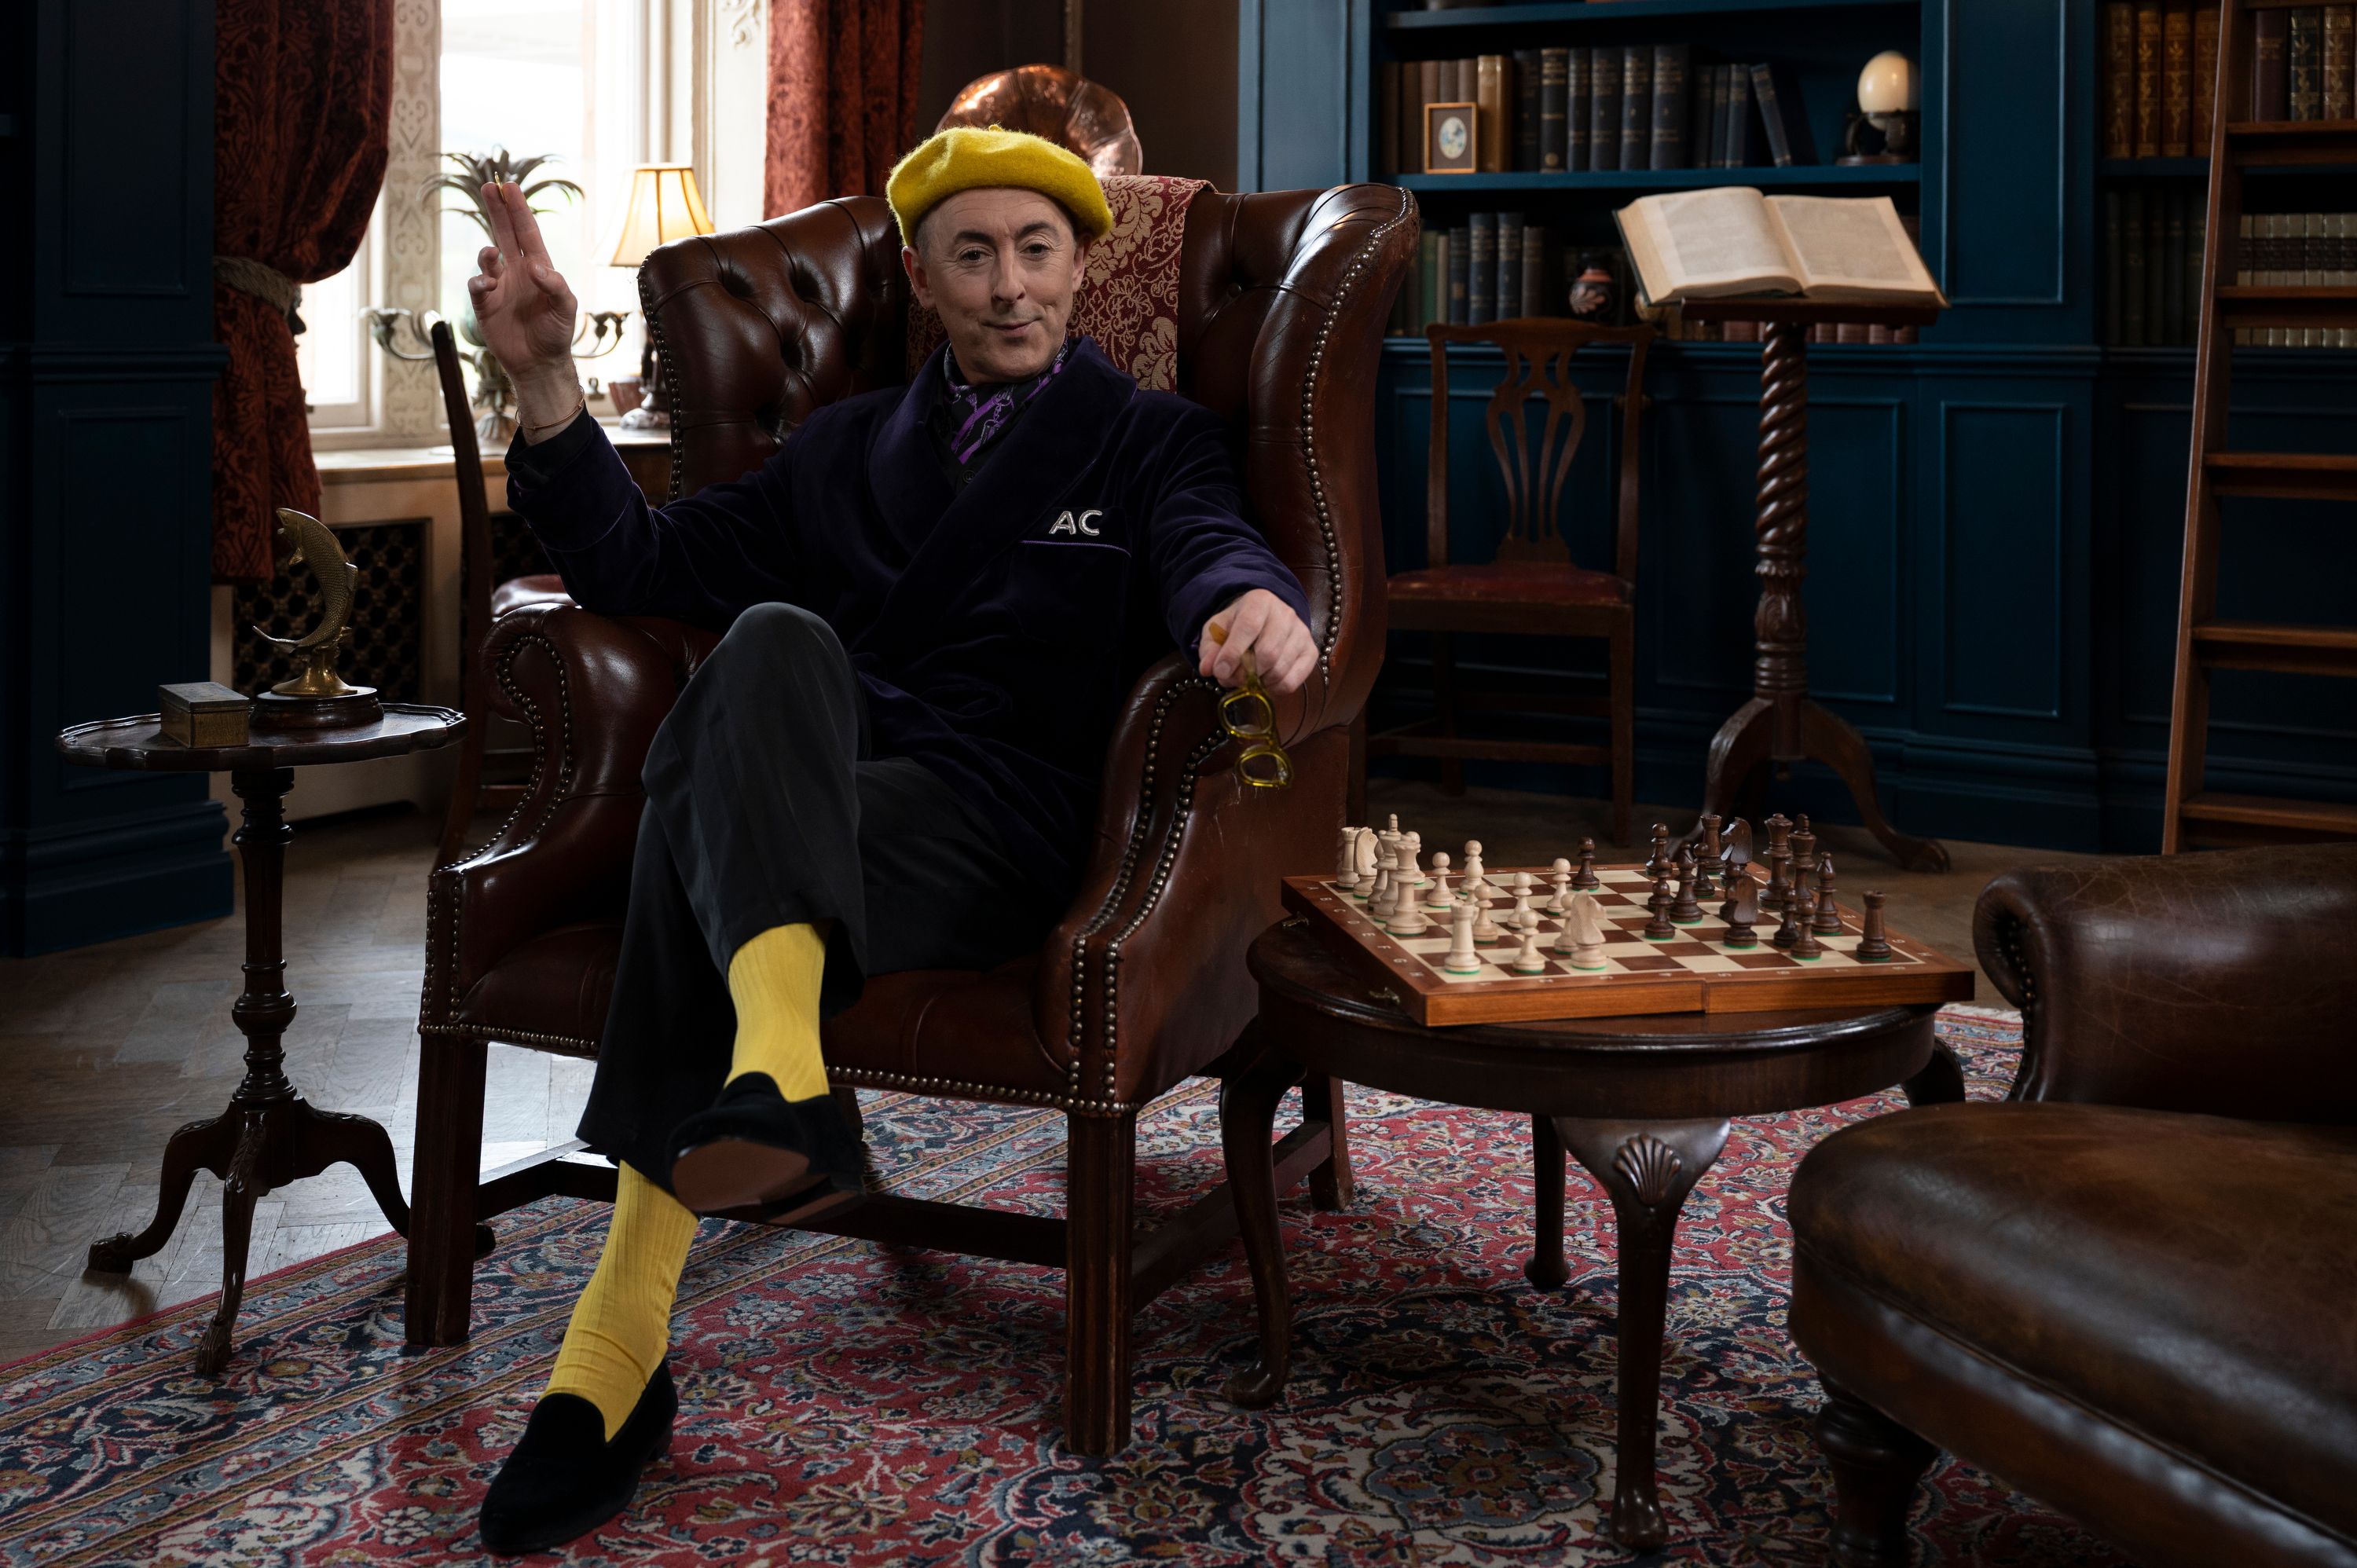 Actor Alan Cumming, in a dark suit with a yellow beret and socks, sits in an armchair with a chessboard on a nearby table. He hosts the TV show The Traitors. 